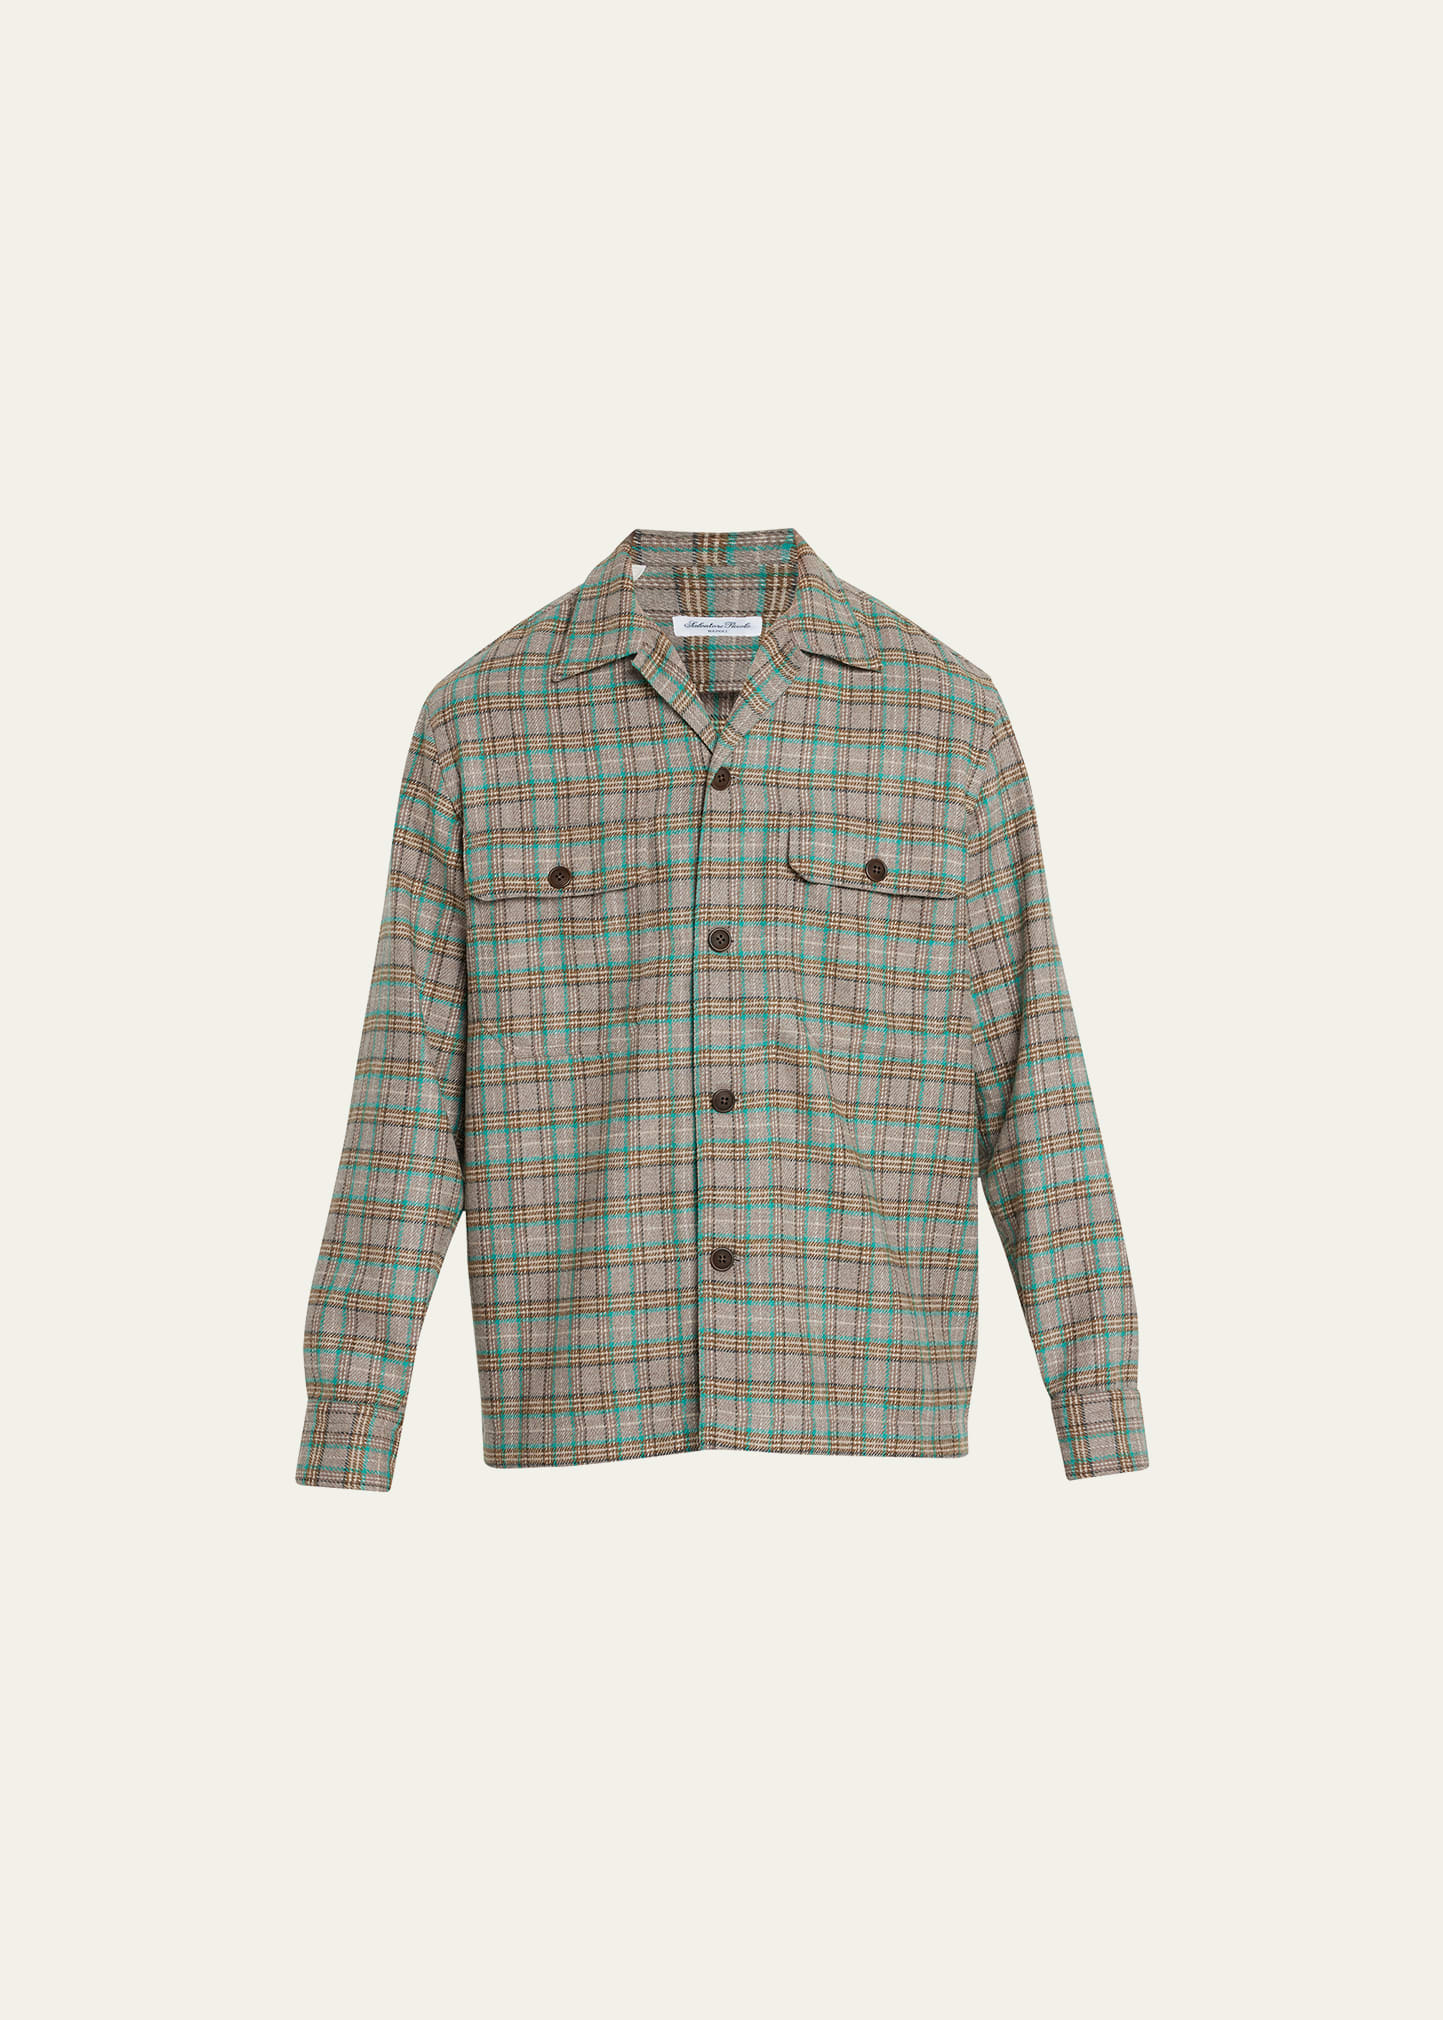 Salvatore Piccolo Men's Wool Plaid Shirt Jacket In Taupe